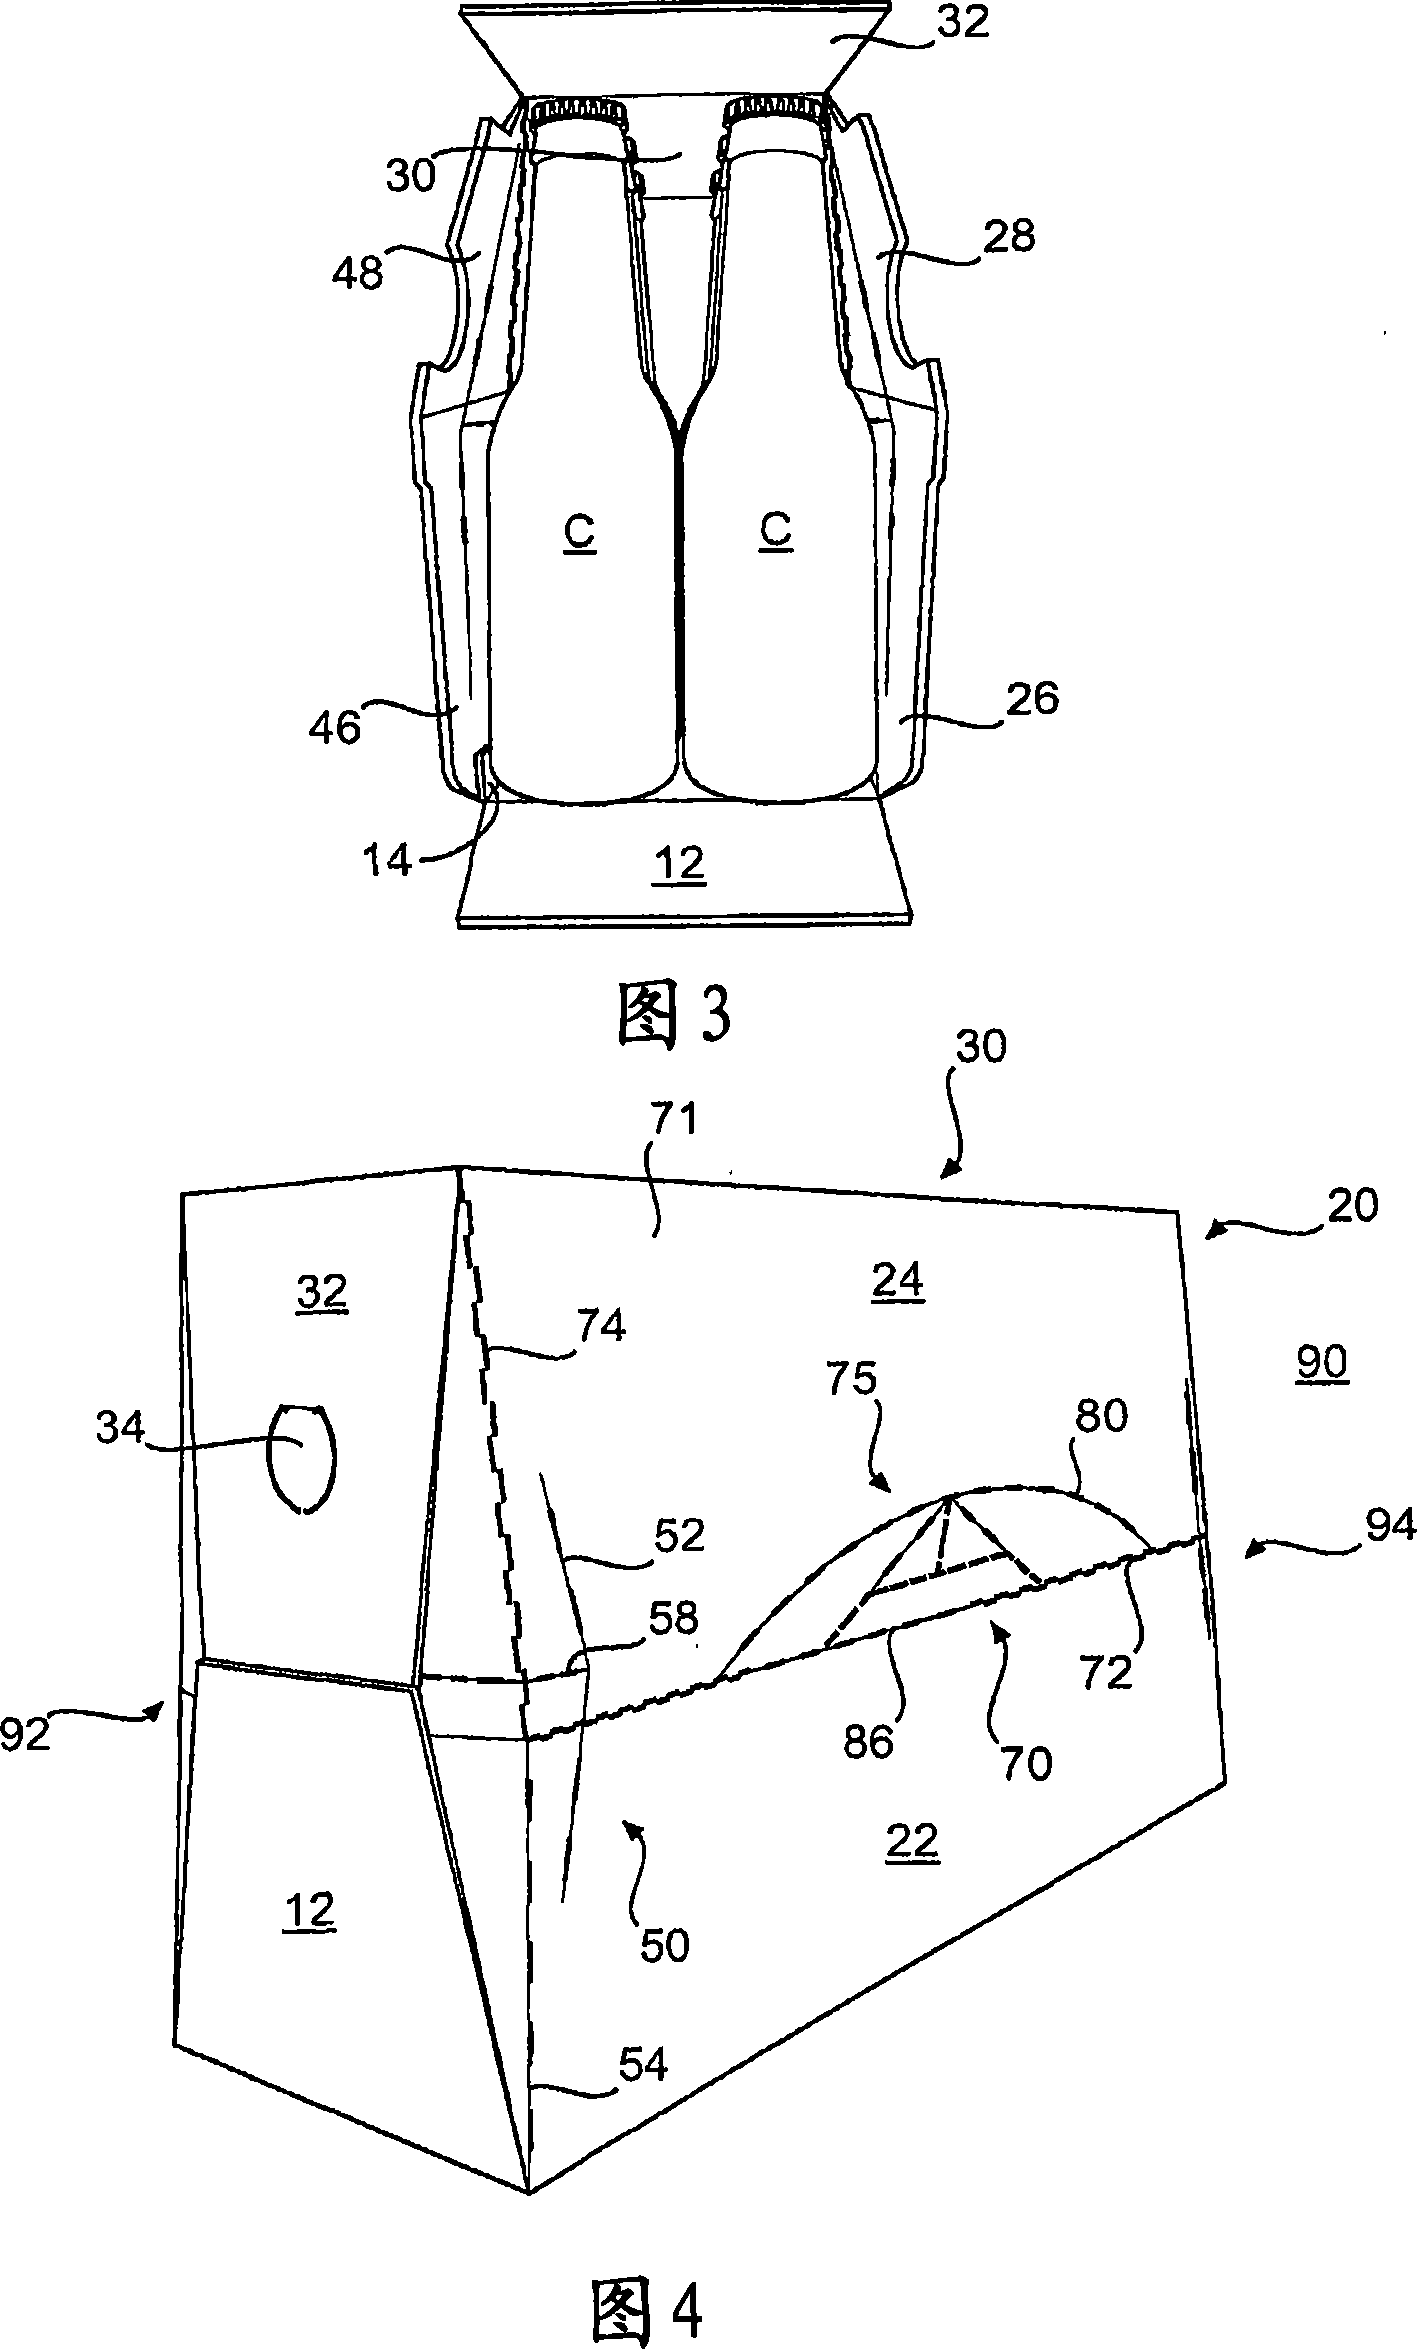 Cartons with dispenser sections